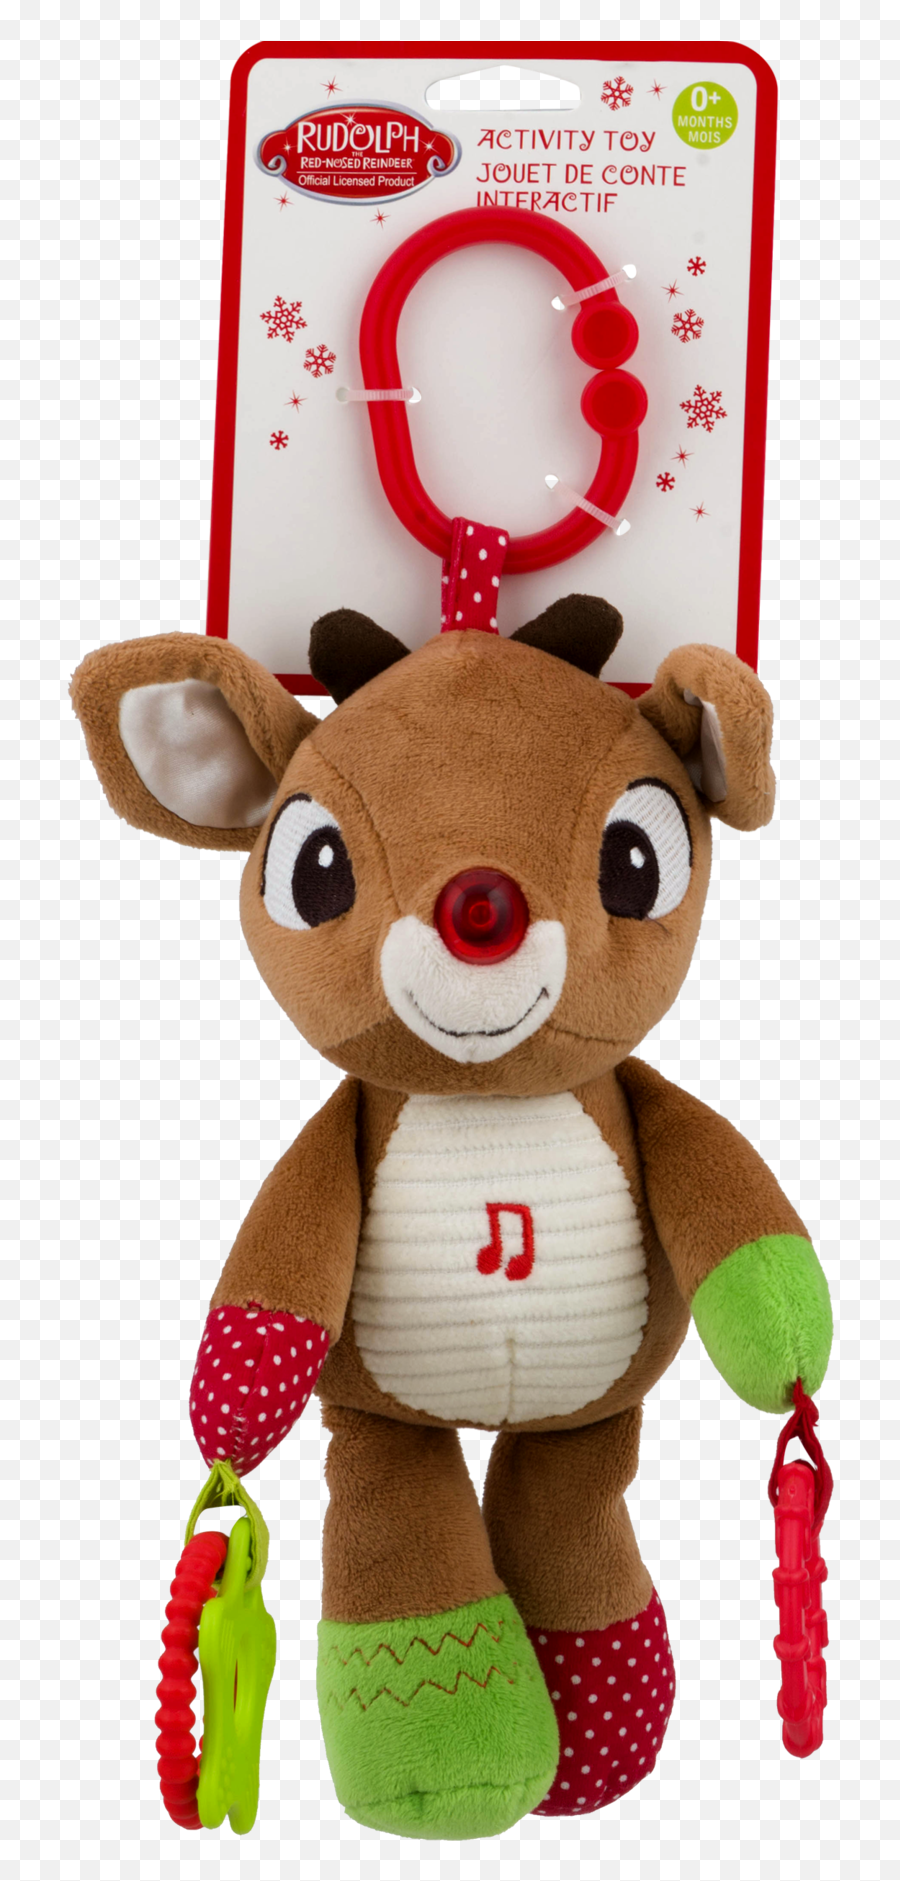 Rudolph The Red Nosed Reindeer Png - Stuffed Toy 3516528 Soft,Rudolph The Red Nosed Reindeer Png